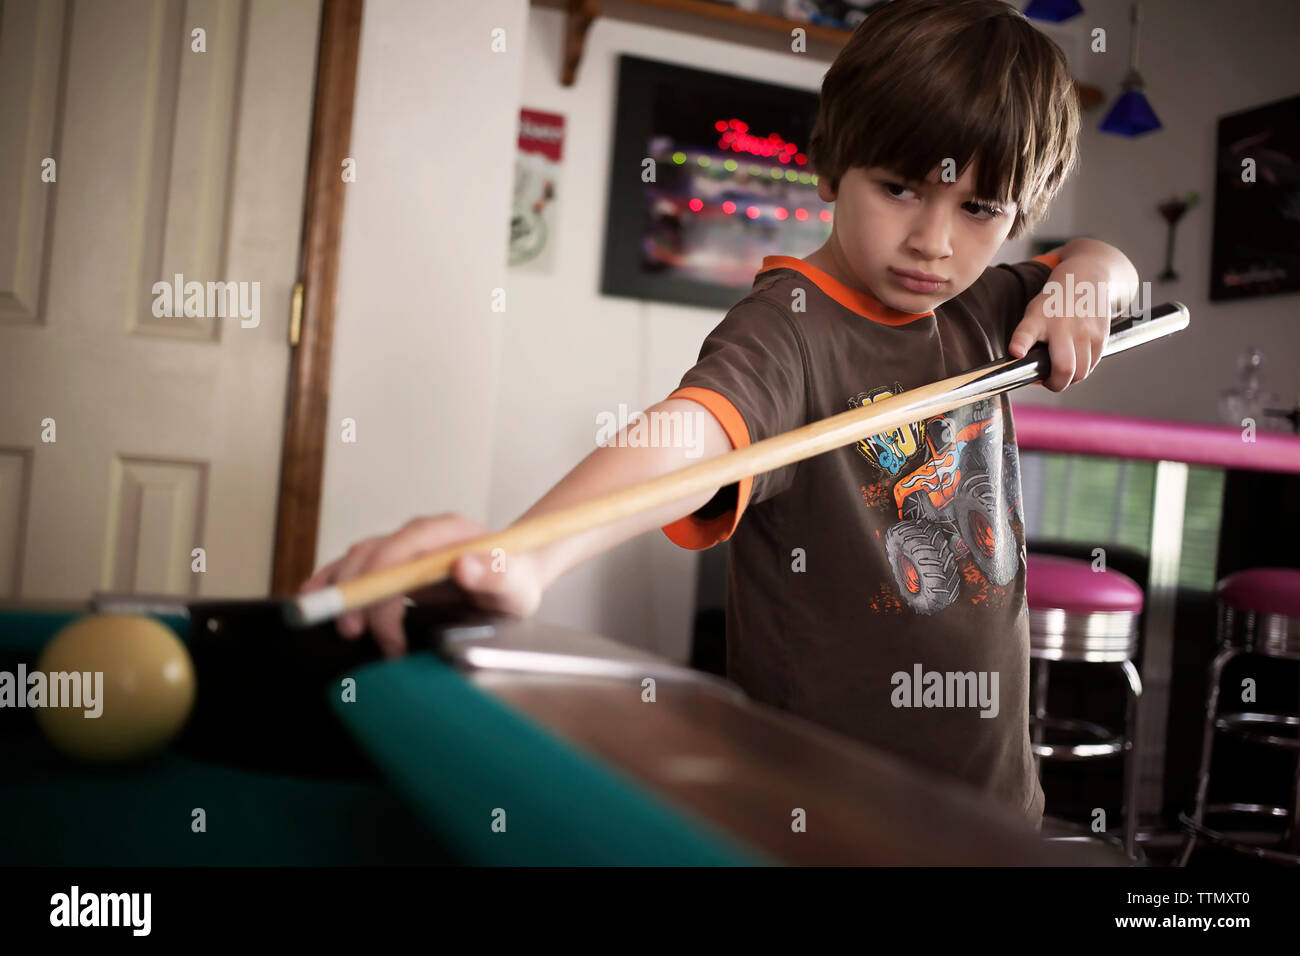 Boy playing pool Banque D'Images